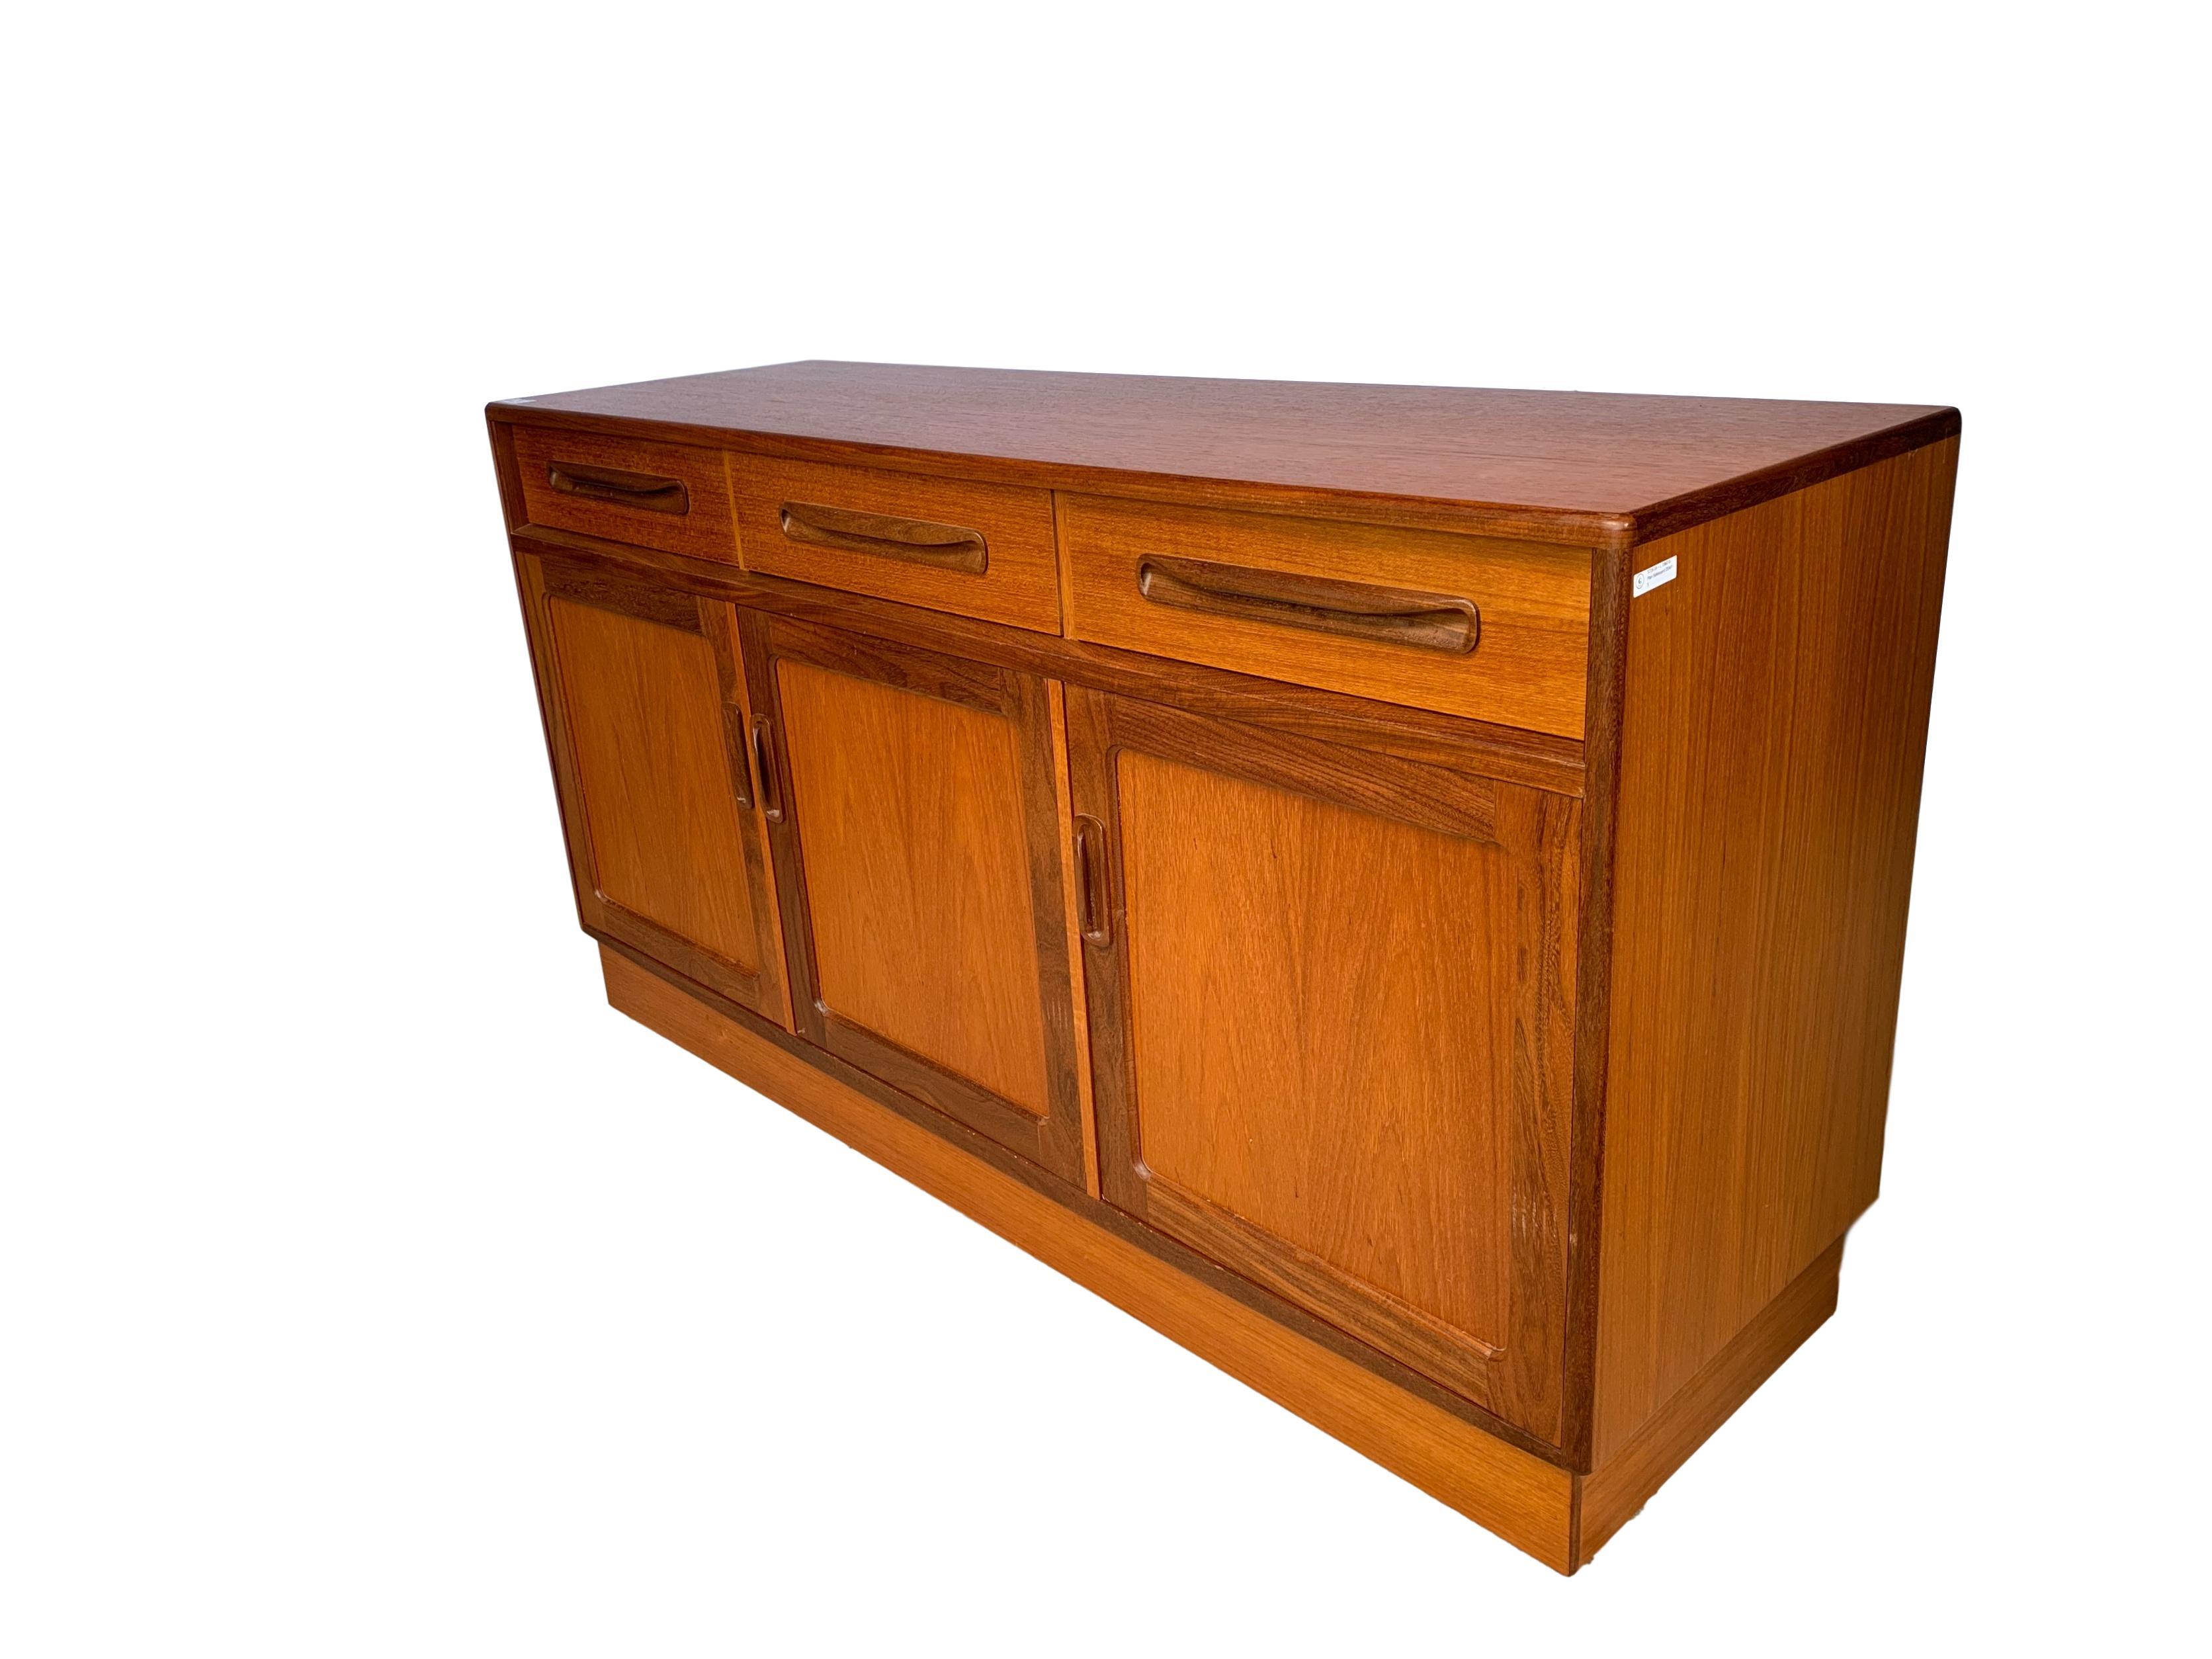 G-Plan Mid-Century Modern sideboard cabinet, teak, English, circa 1965. This piece is made to the highest quality standards. Lovely color and size.